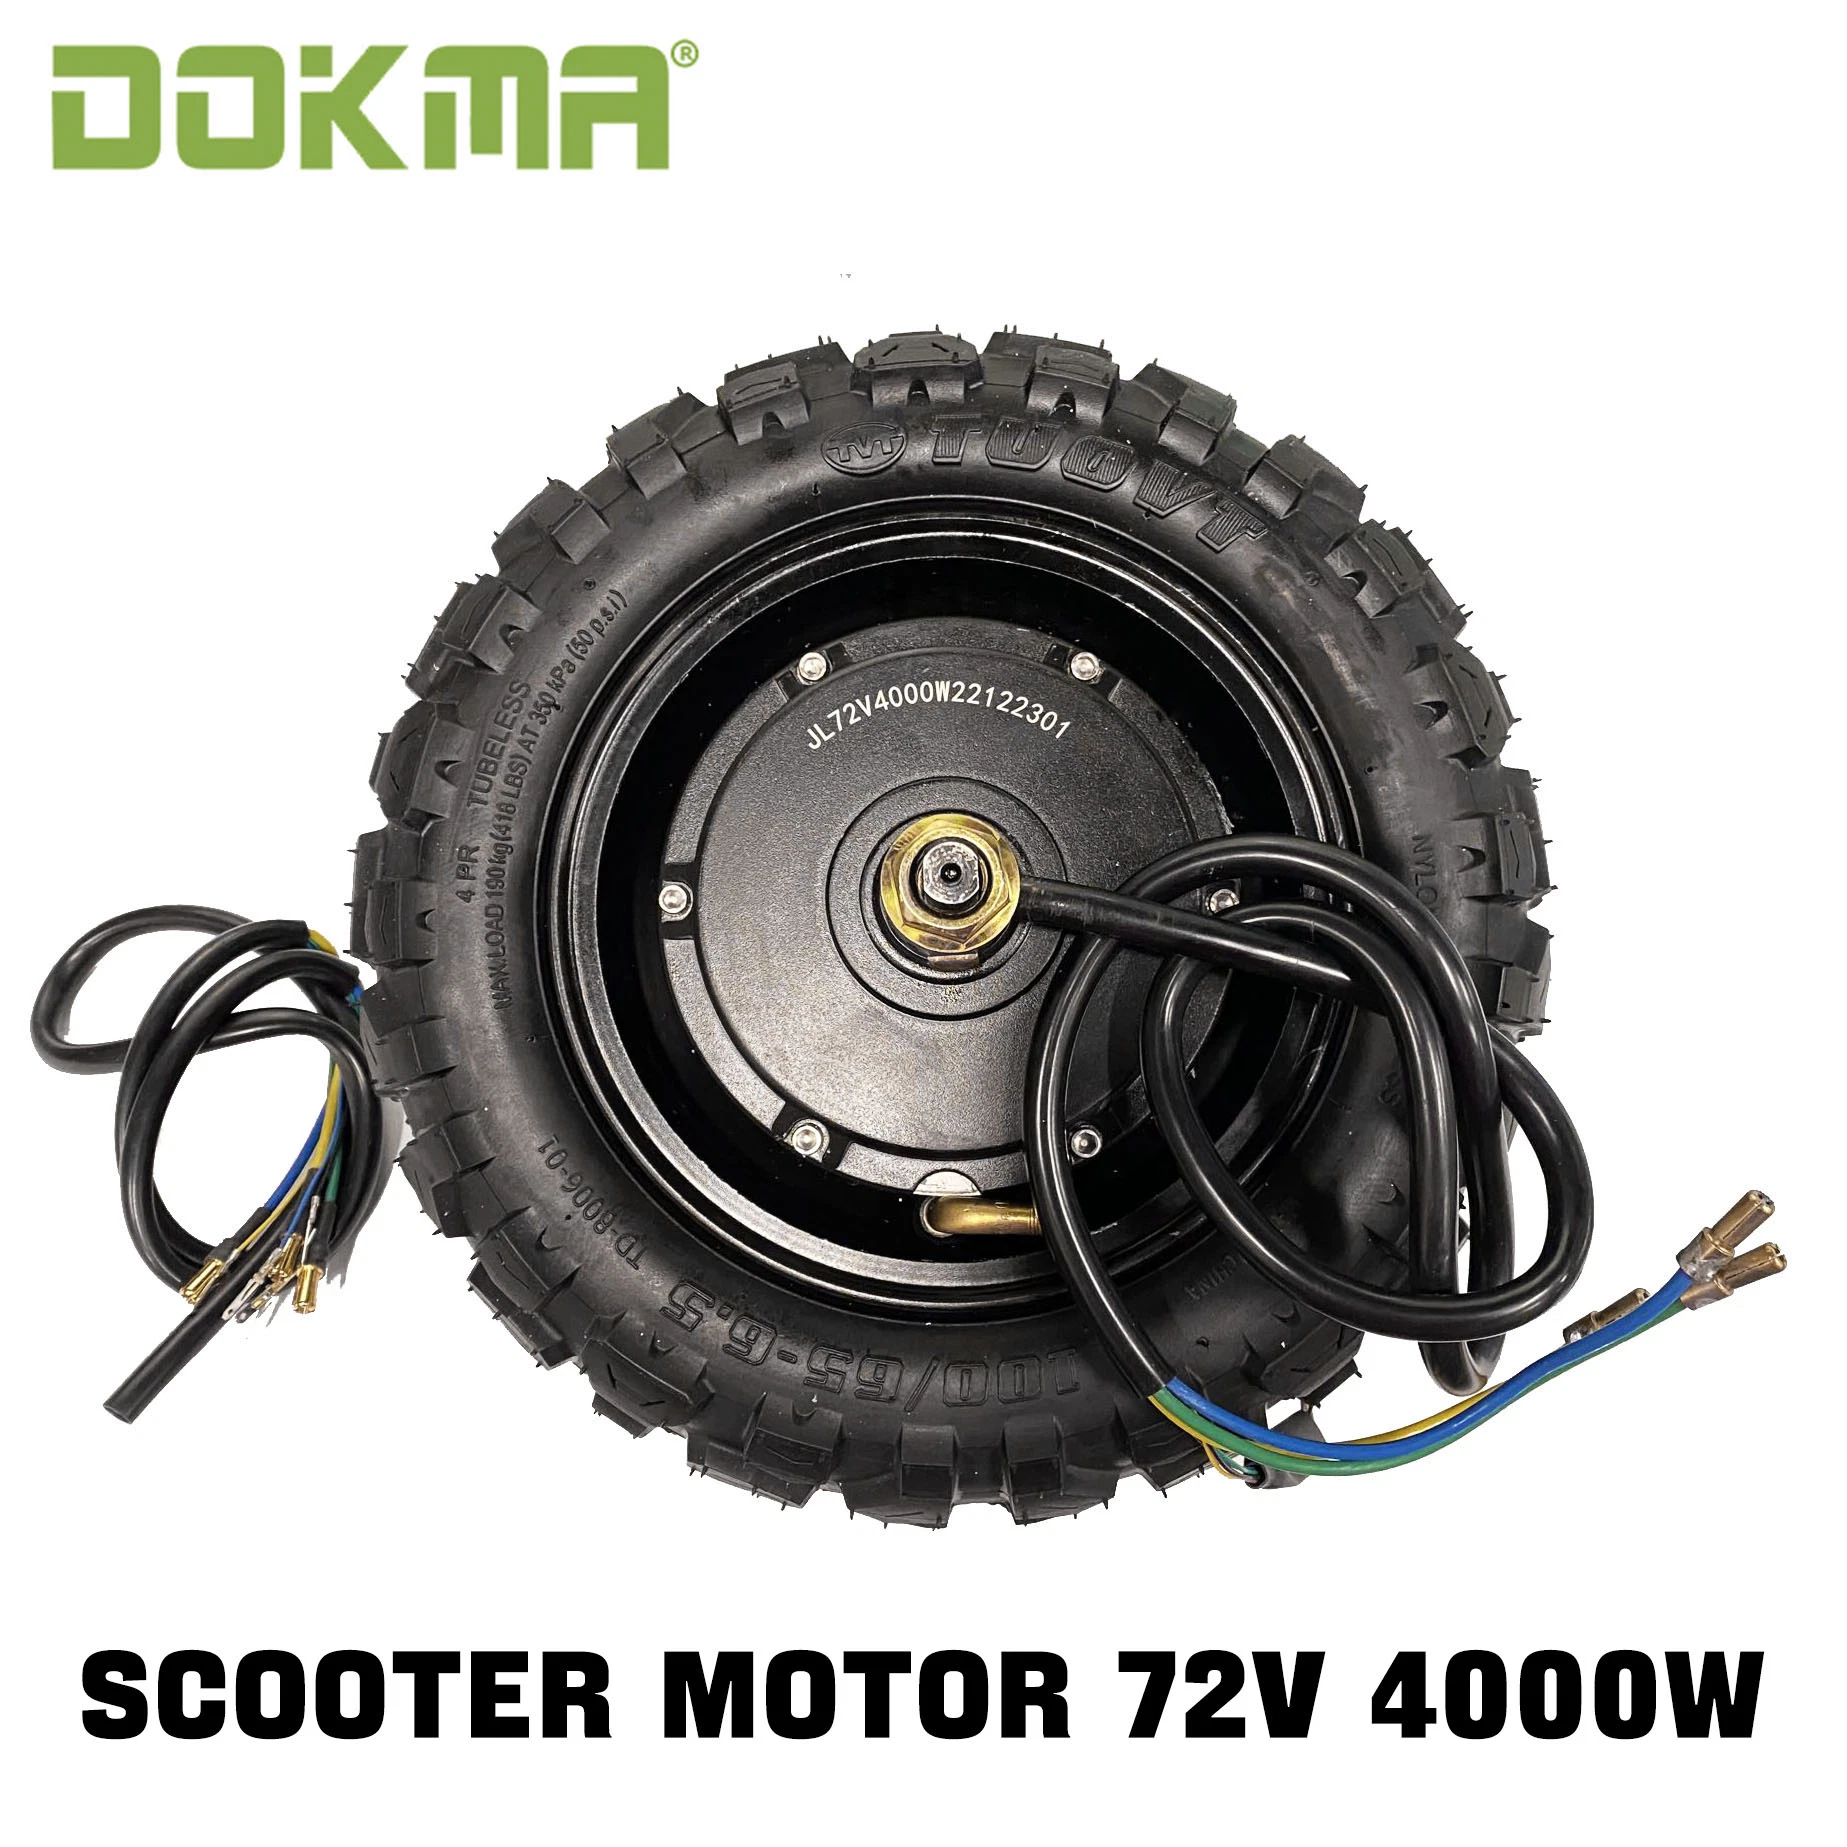 Dokma 72V 4000W Scooter Brushless Motor for Electric Scooter and Electric Bikes